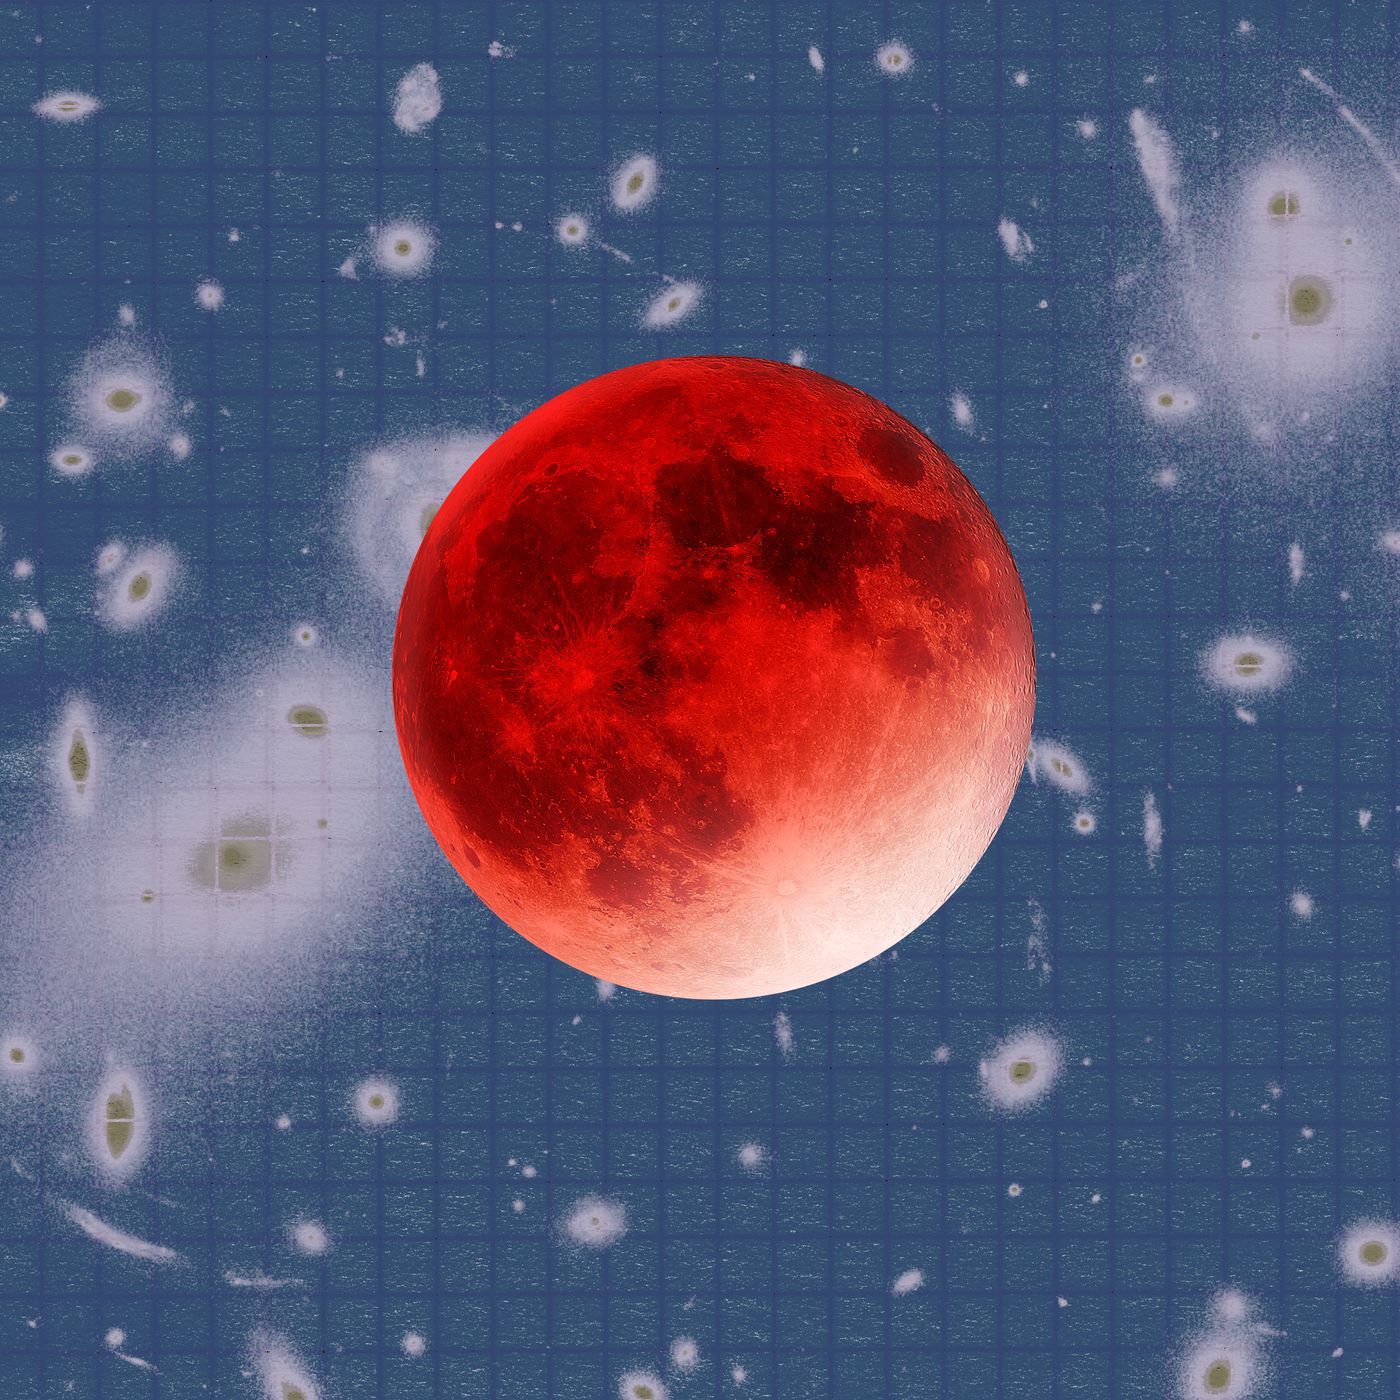 A Blood Moon Lunar Eclipse Is Happening on Election Day 2022